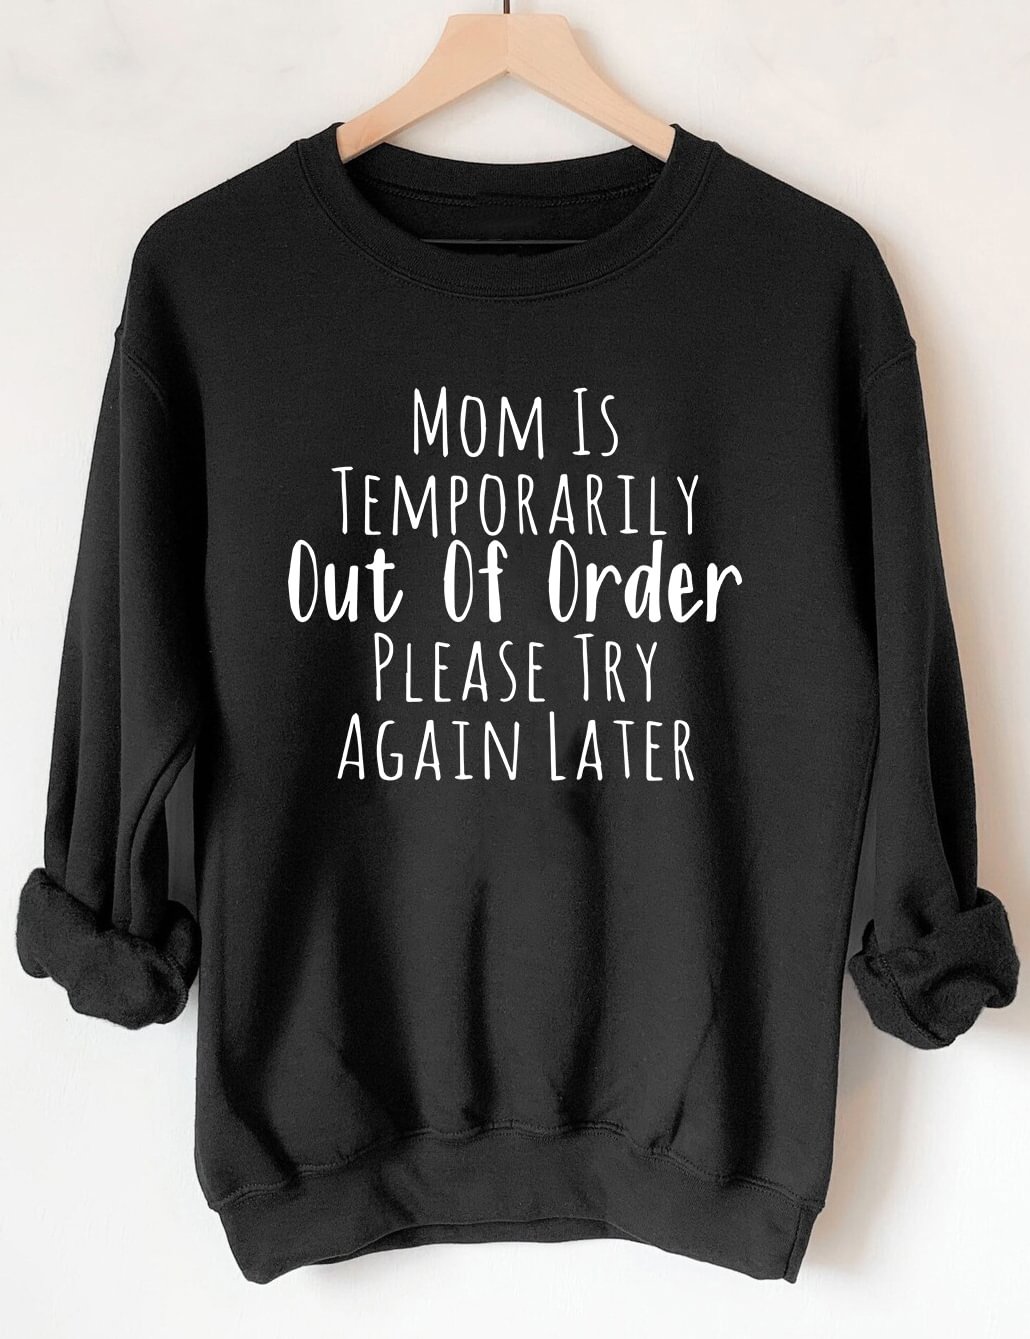 Mom Is Temporarily Out Of Order Sweatshirt